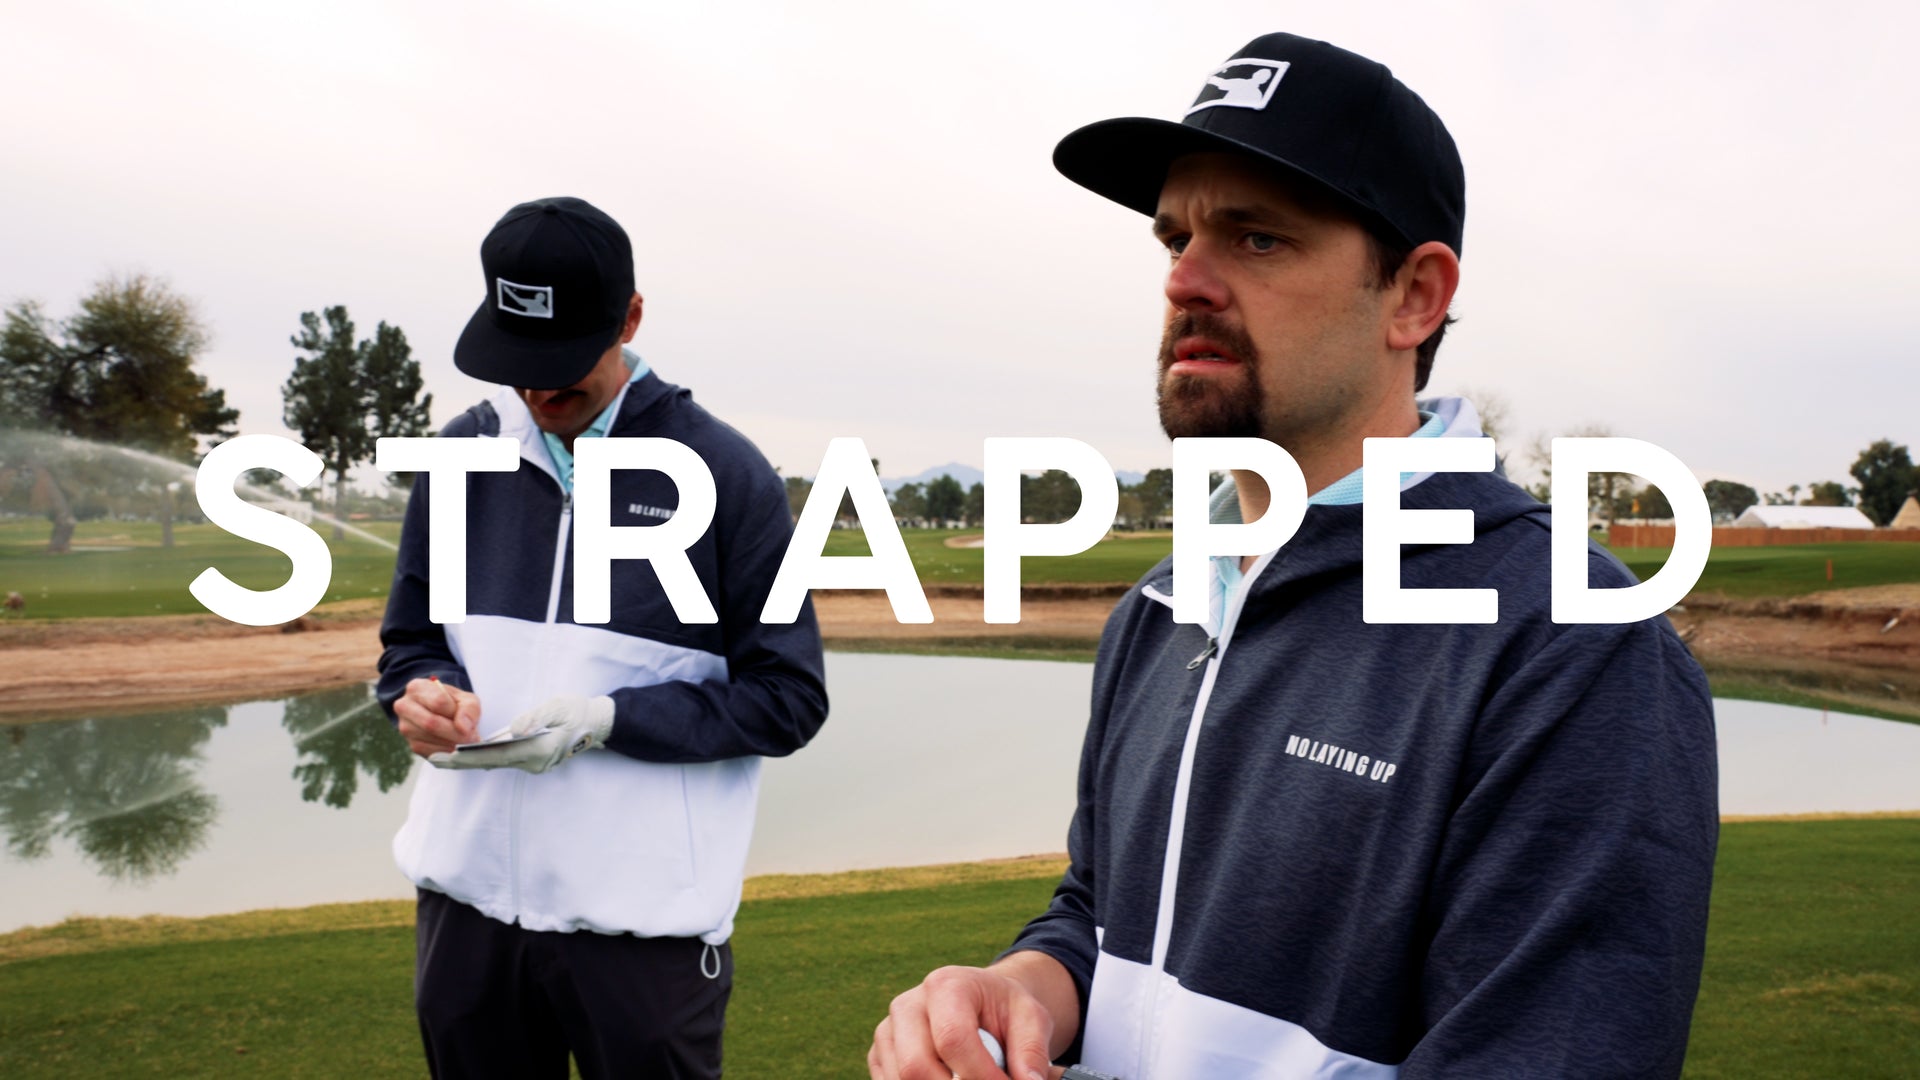 Load video: Strapped: Spring Training (Part 2)